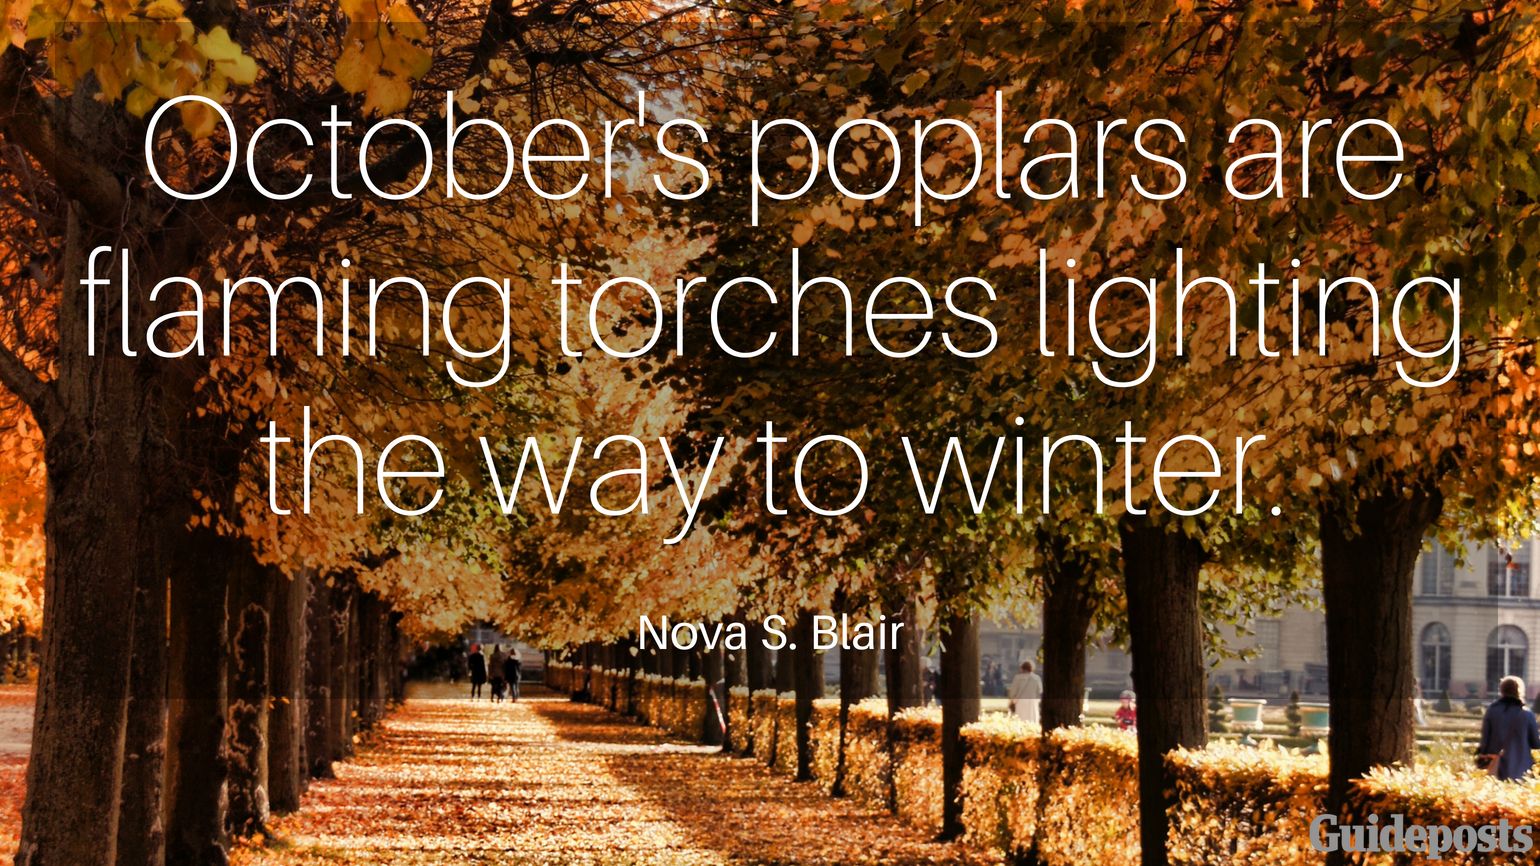 October's poplars are flaming torches lighting the way to winter. —Nova S. Blair